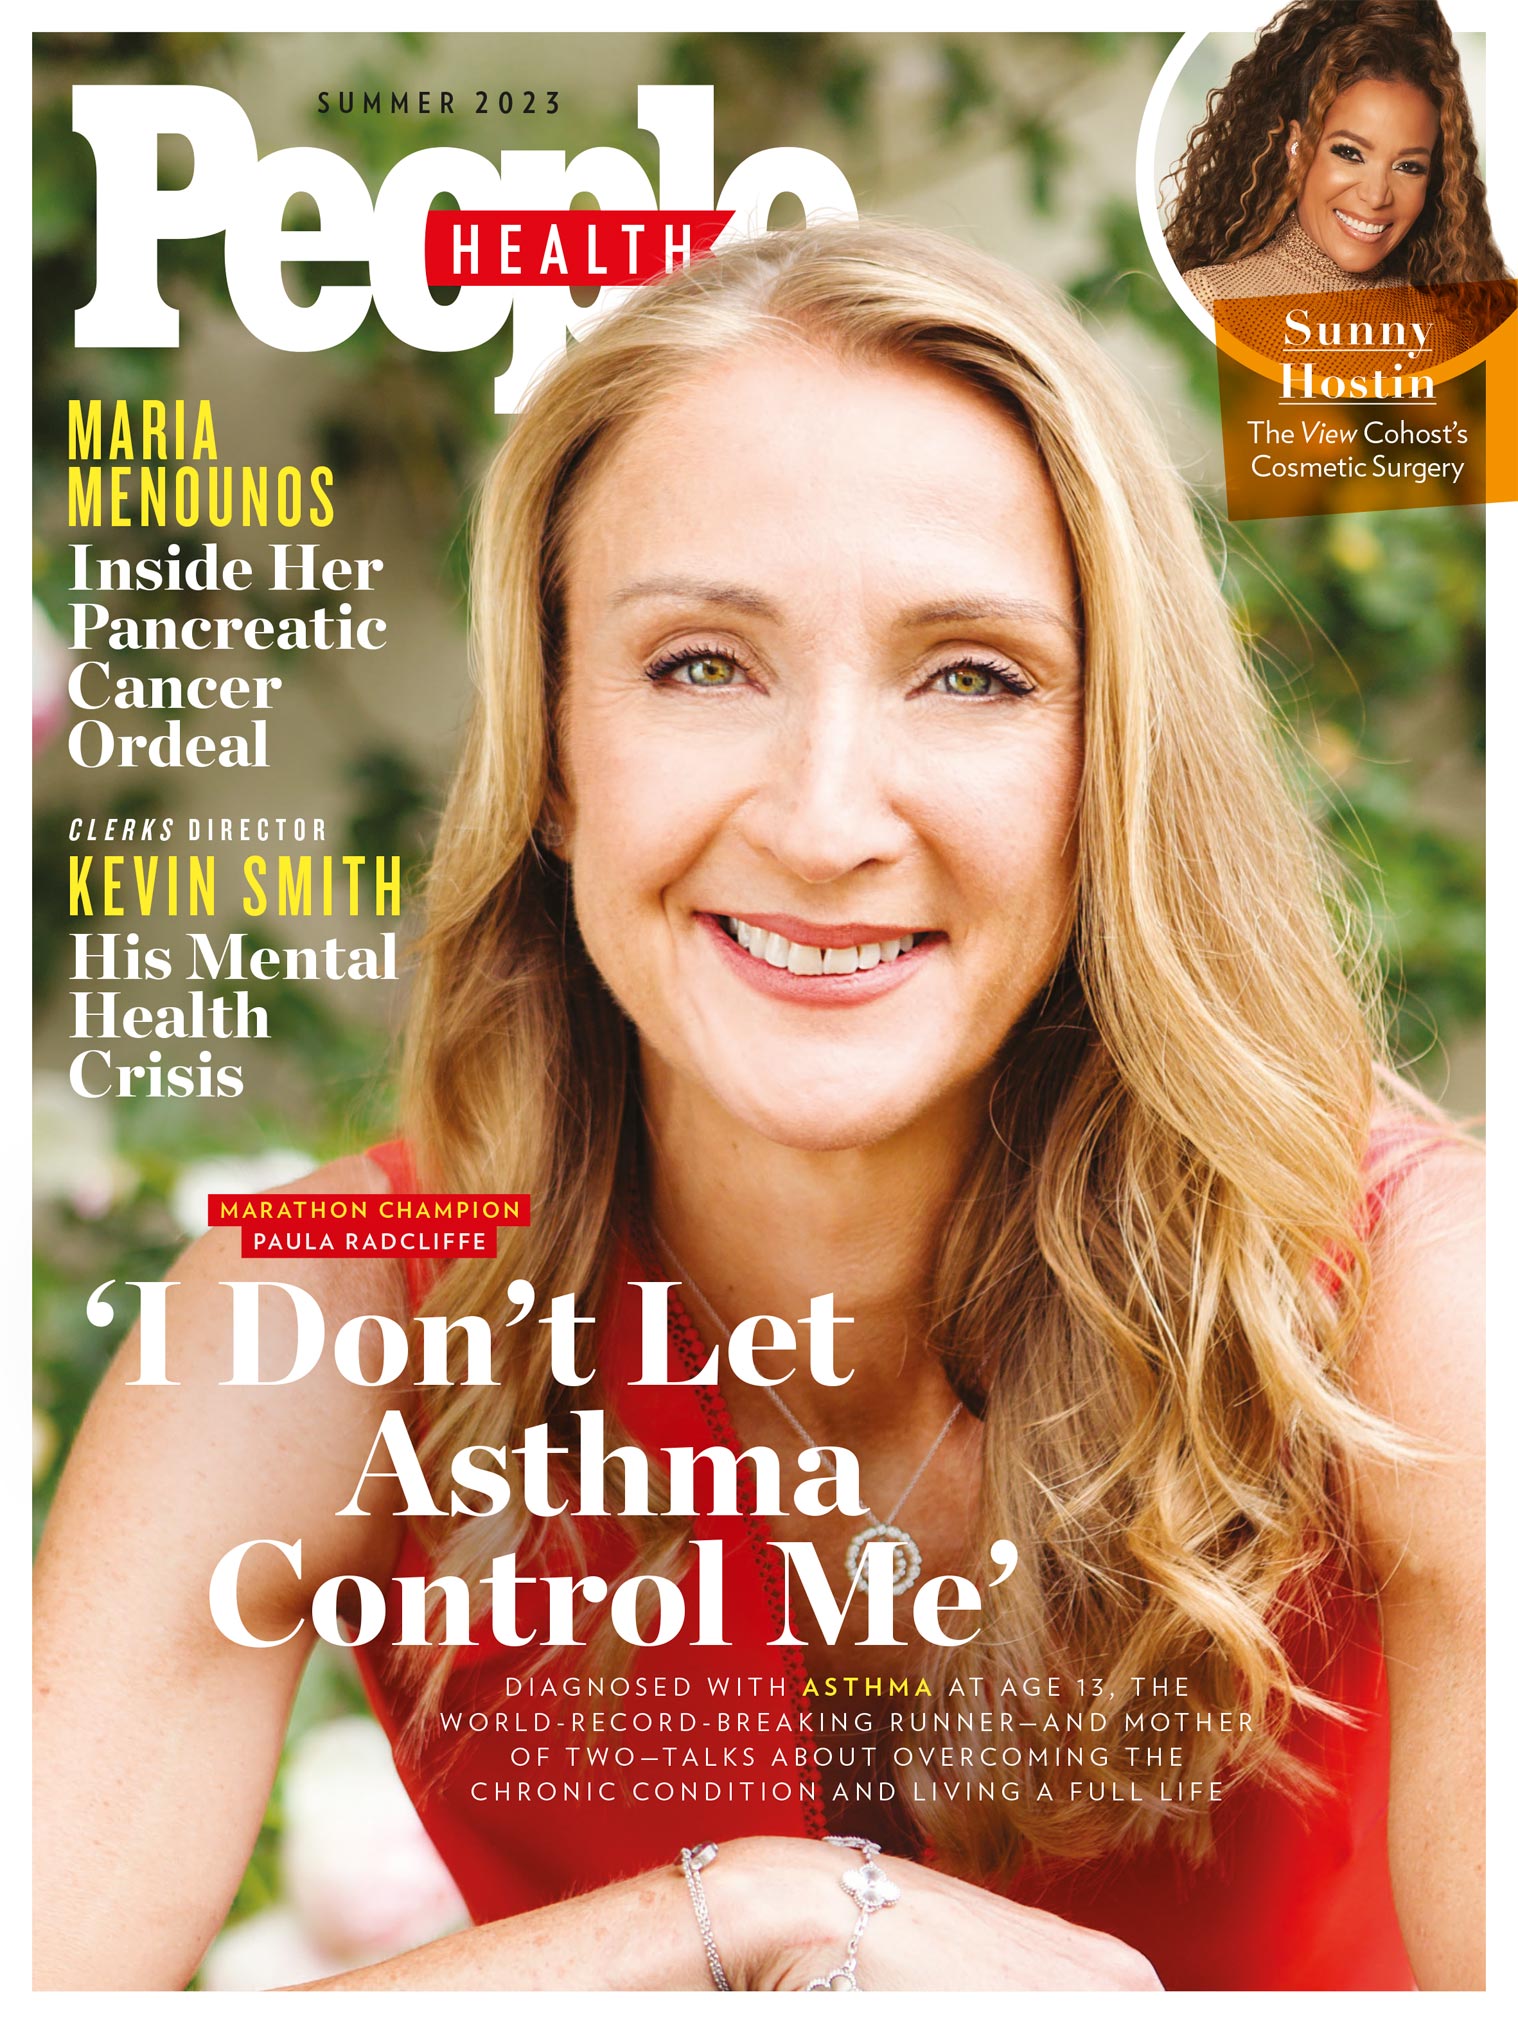 Cover of People Health magazine, showing portrait of Paula Radcliffe wearing a red dress